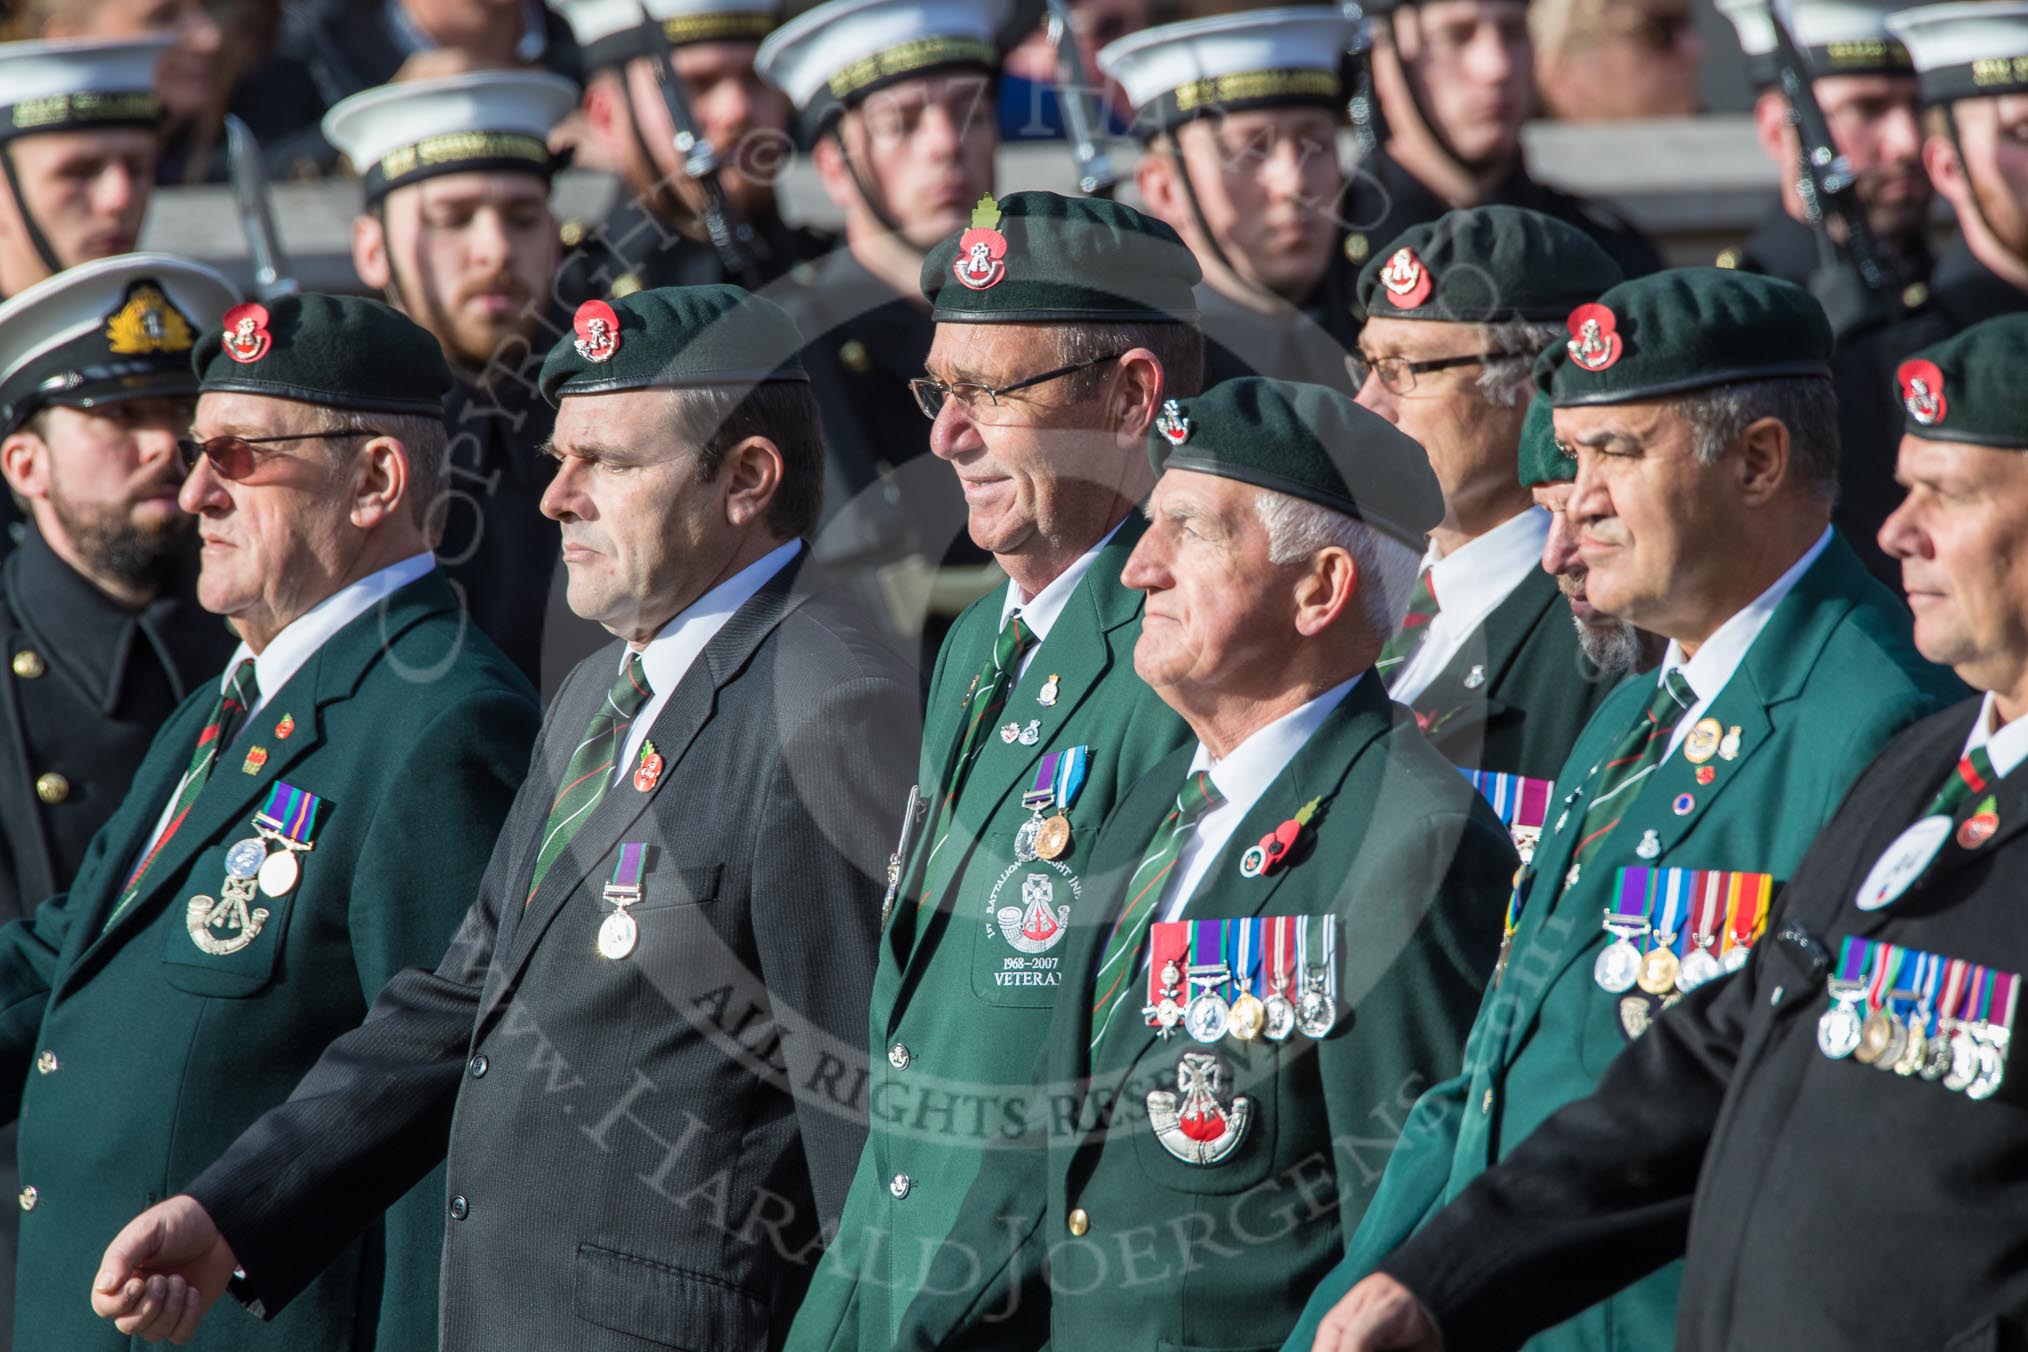 The Light Infantry Association (Group A4, 26 members) during the Royal British Legion March Past on Remembrance Sunday at the Cenotaph, Whitehall, Westminster, London, 11 November 2018, 11:56.